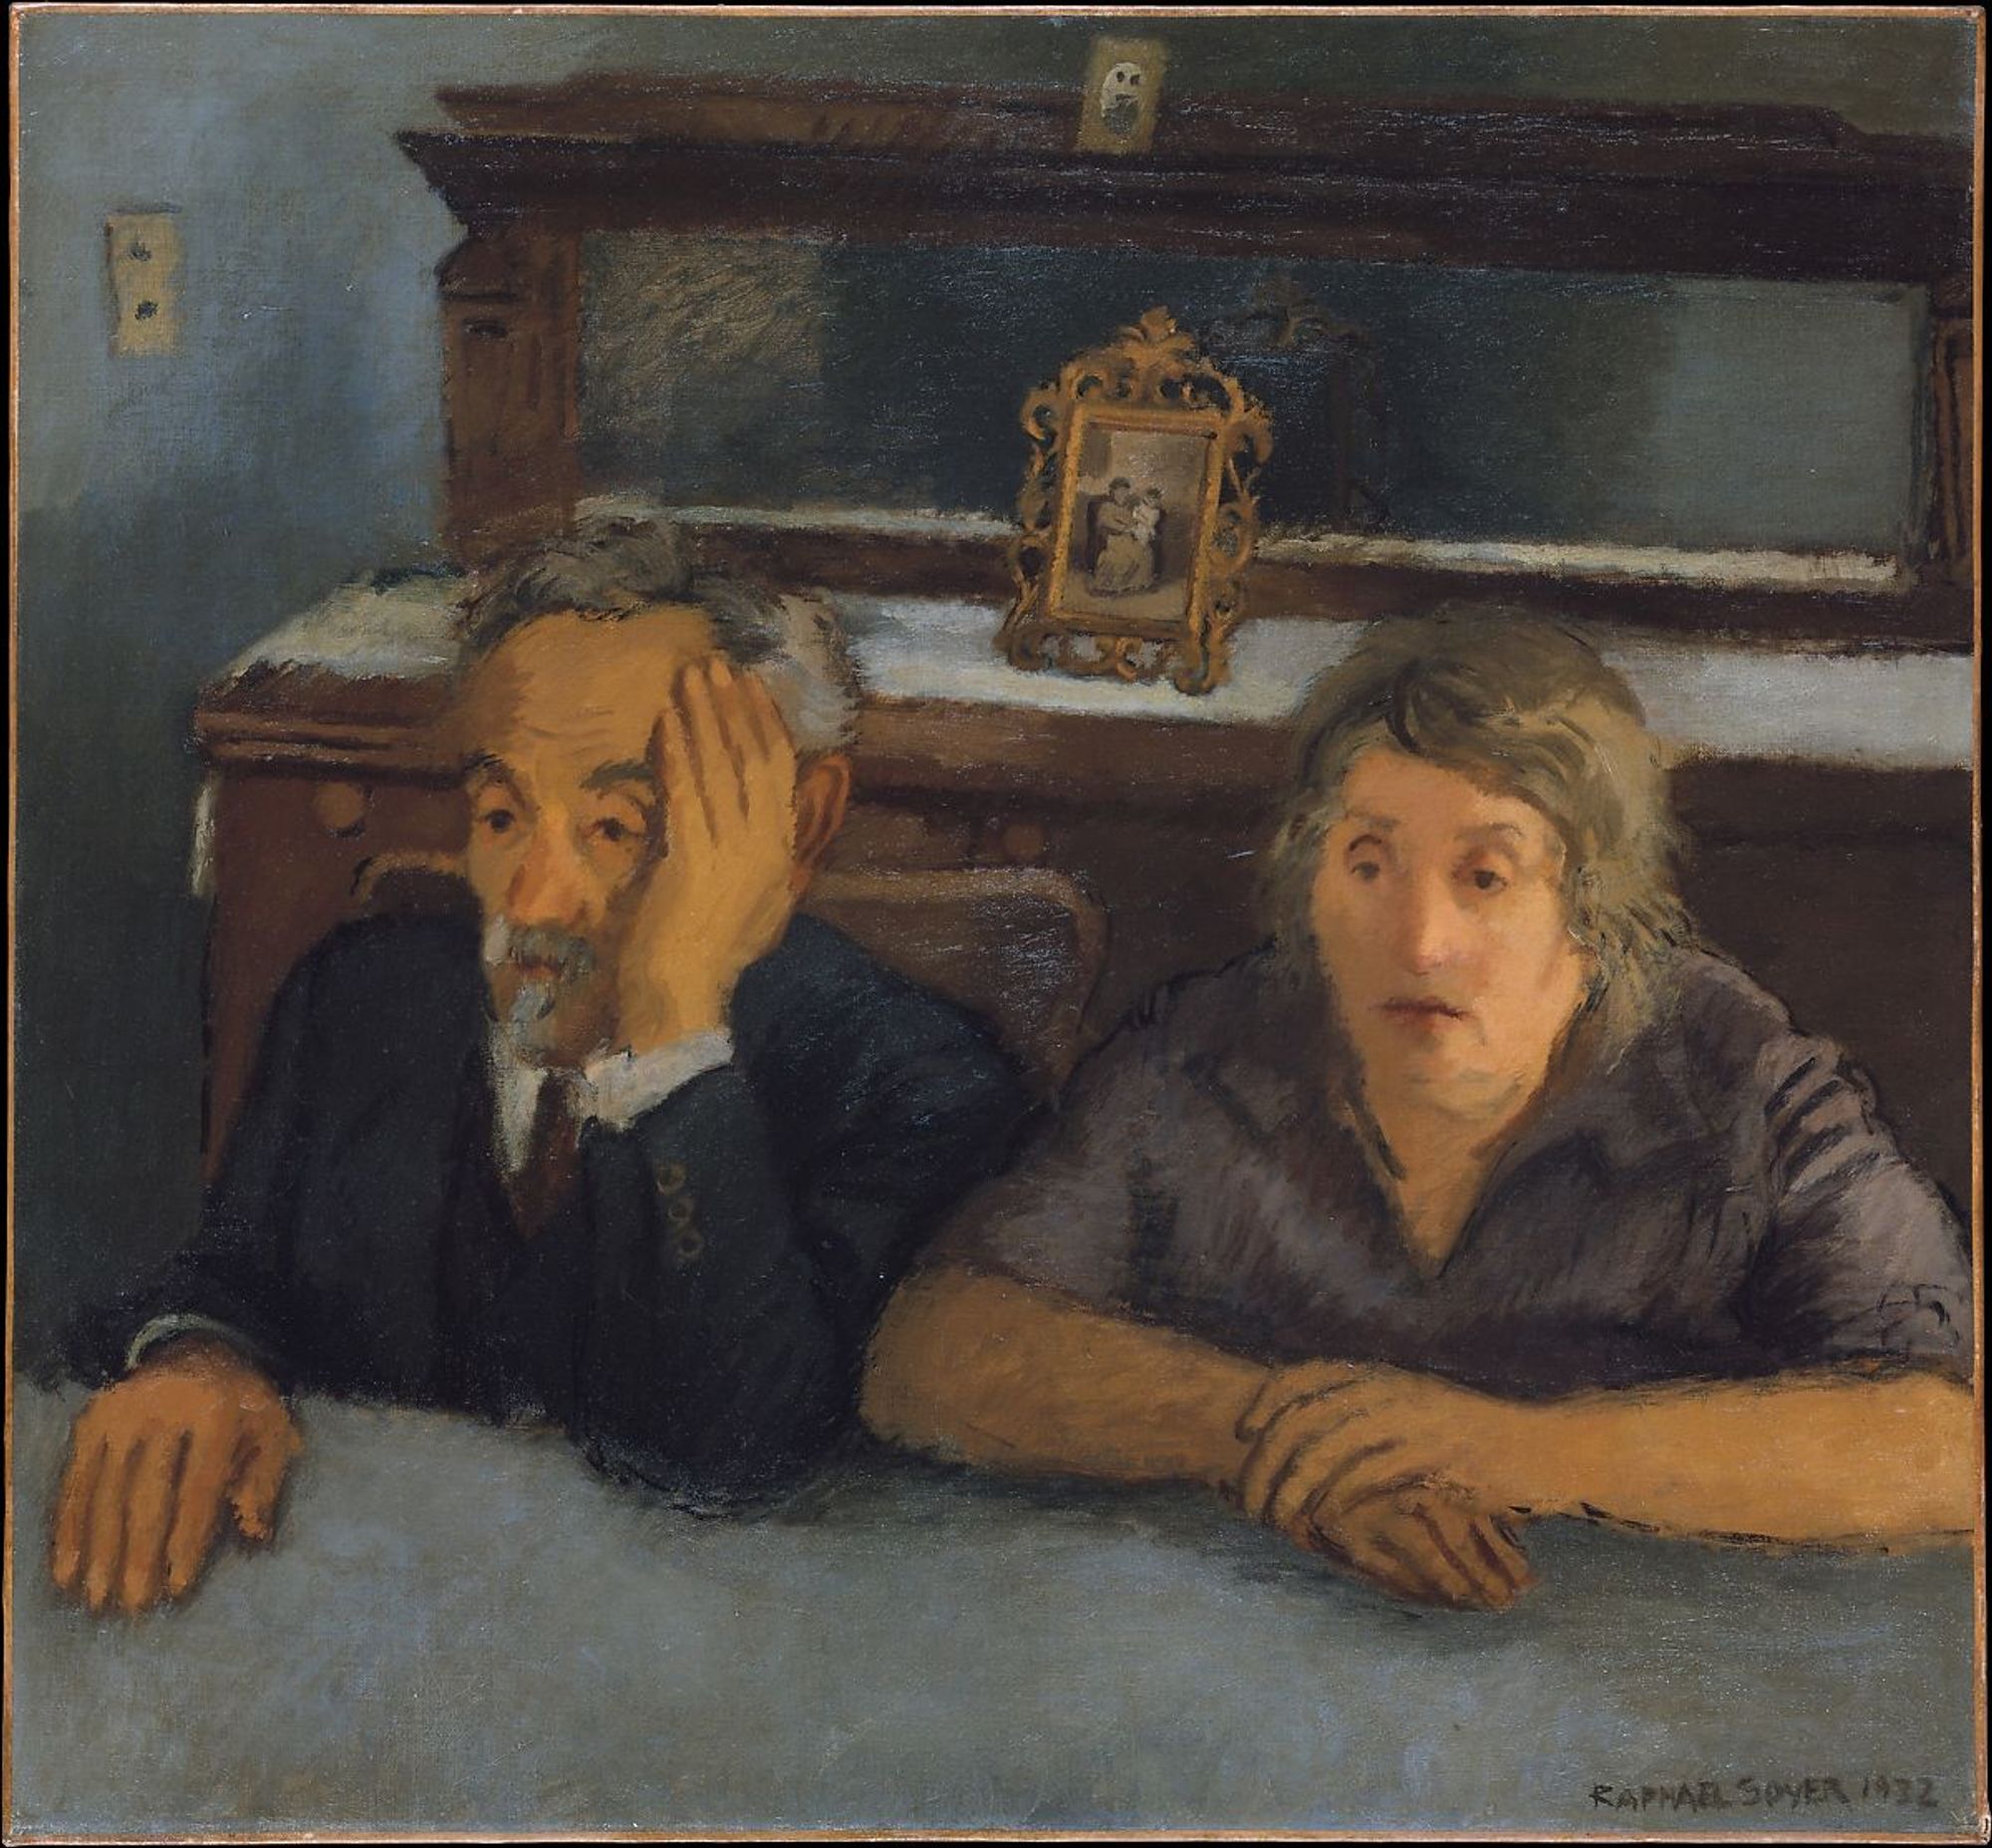 Painting by Rafael Soyer, of an elderly couple sitting at a table.